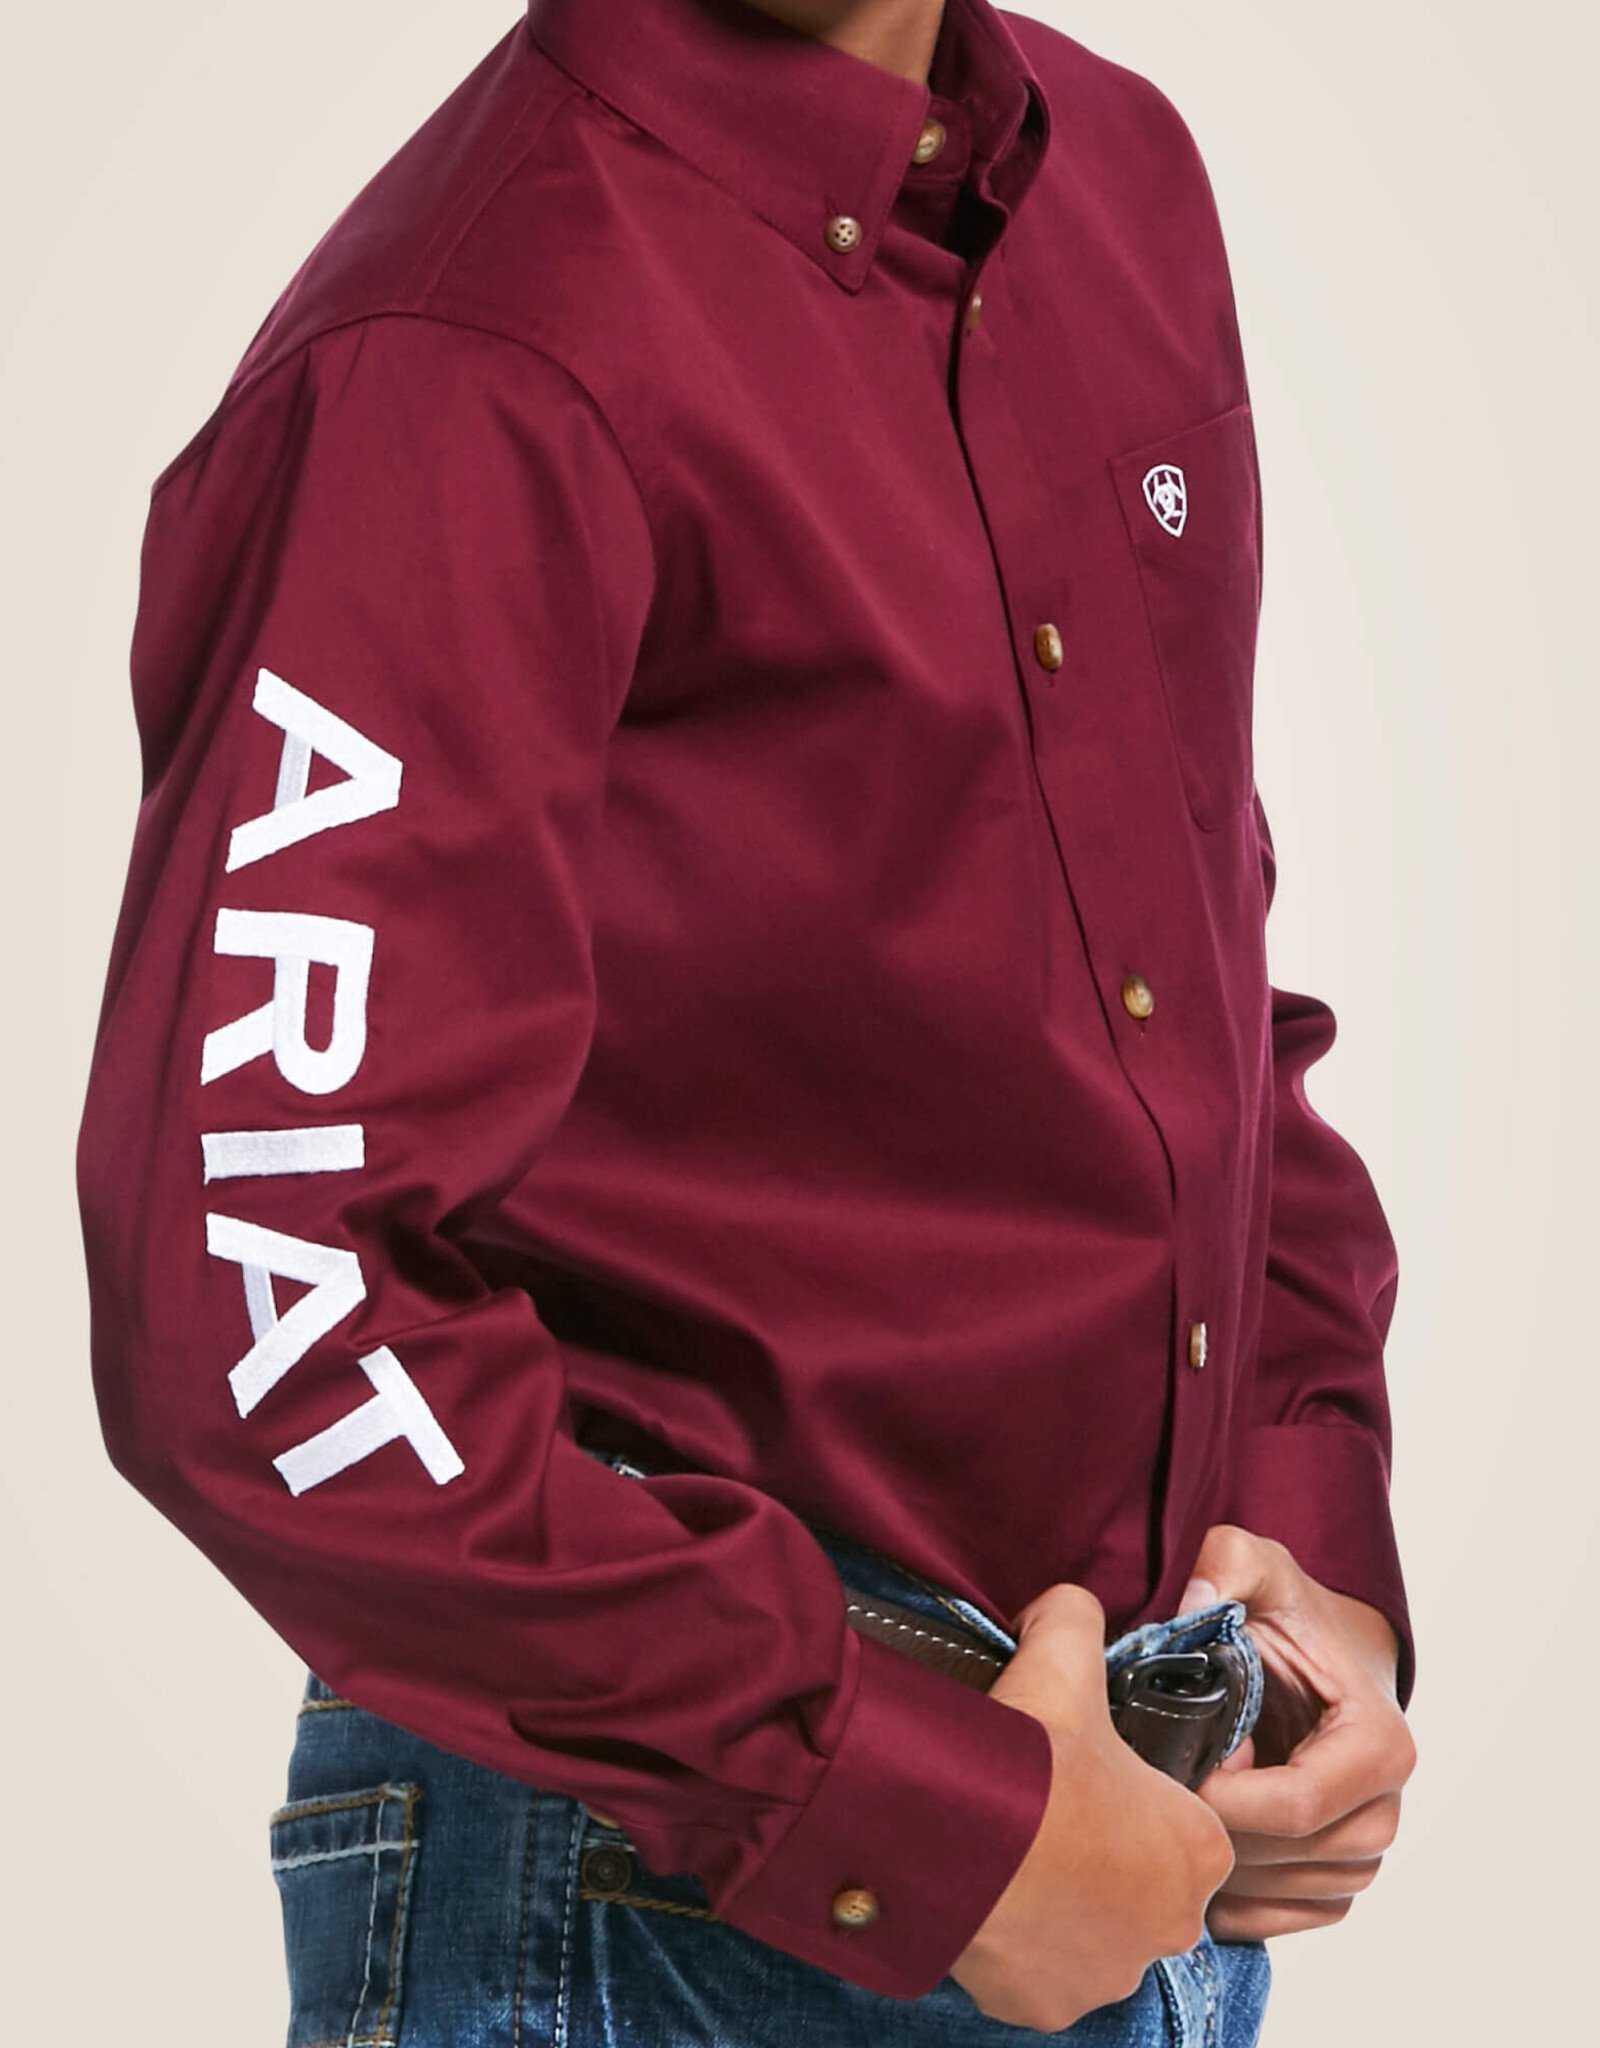 Ariat Boys Burgundy and White Team Logo Twill Classic Fit Western Button Shirt